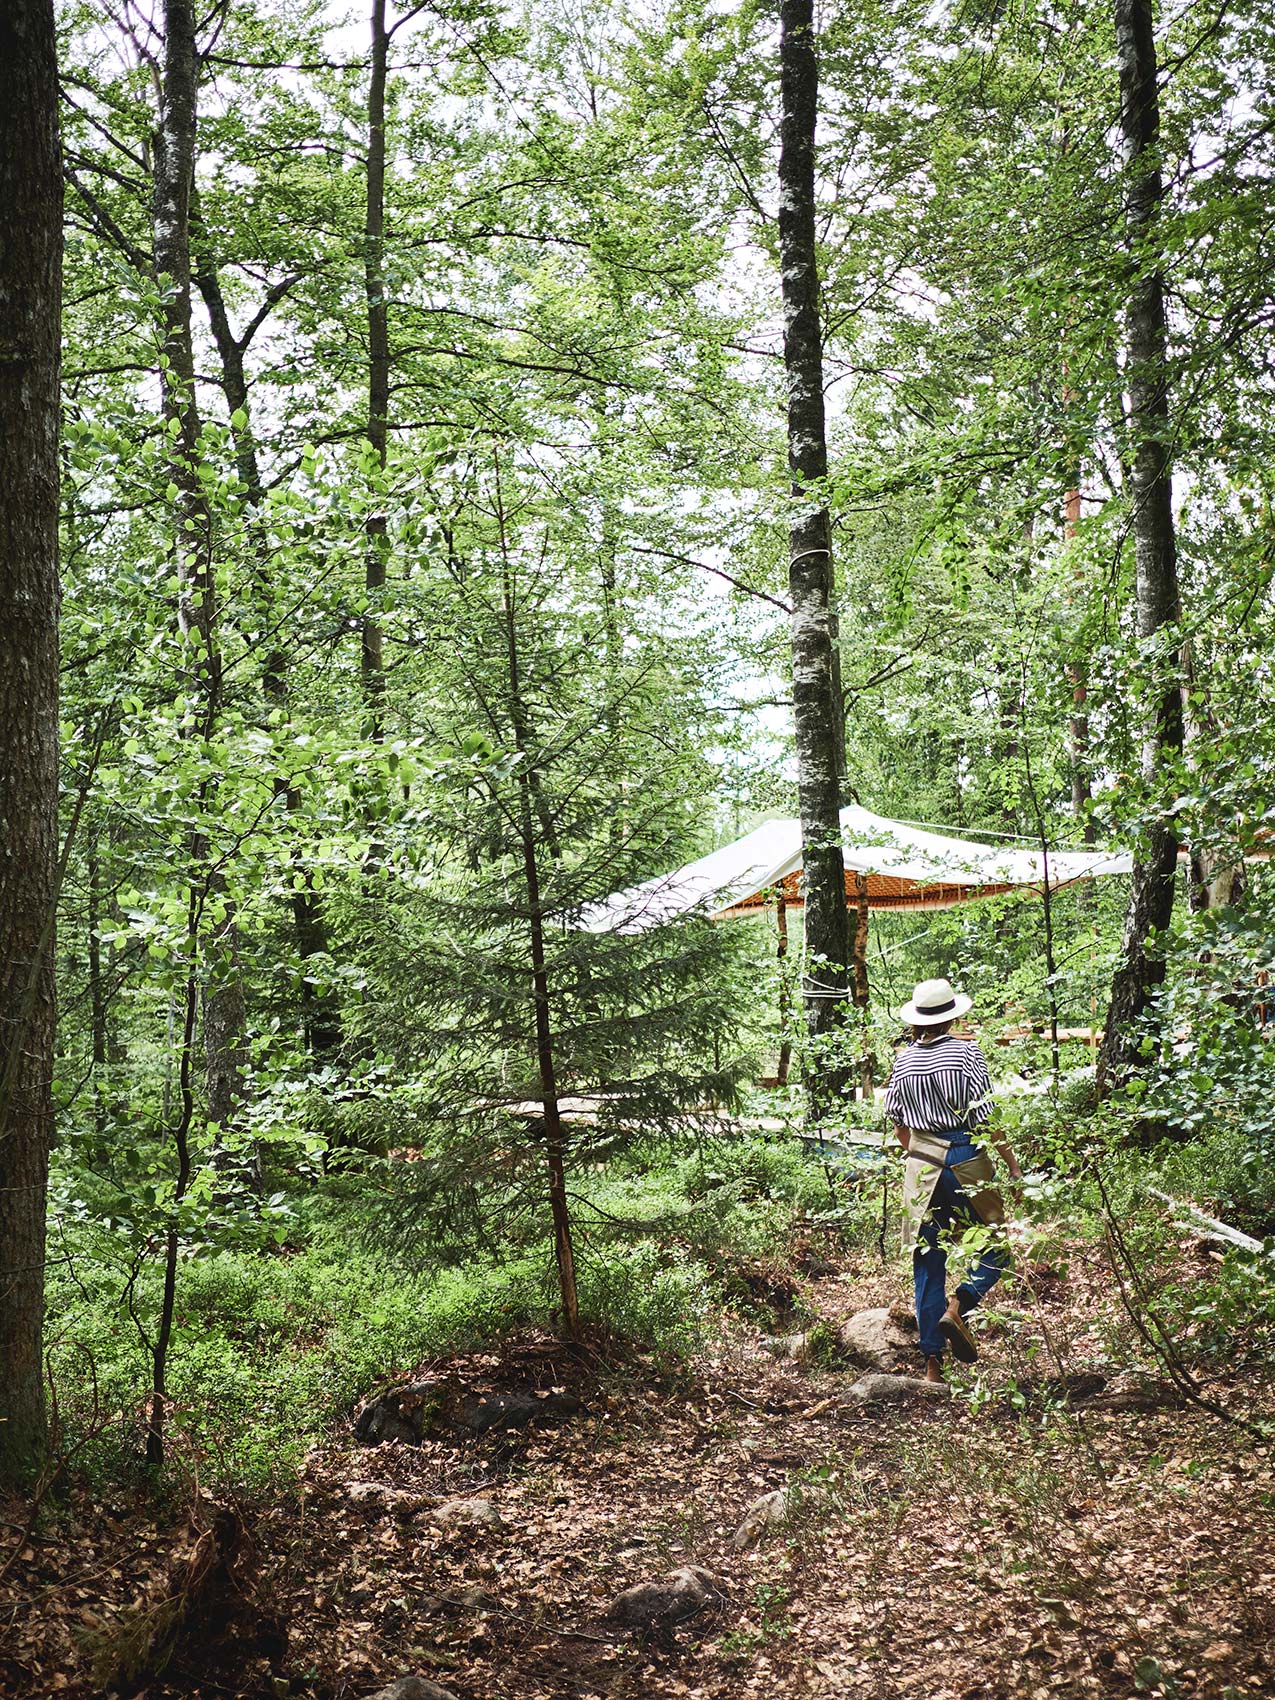 Stedsans in the Woods • Outdoor Dining Tent Amongst Trees • Lifestyle & Editorial Food Photography